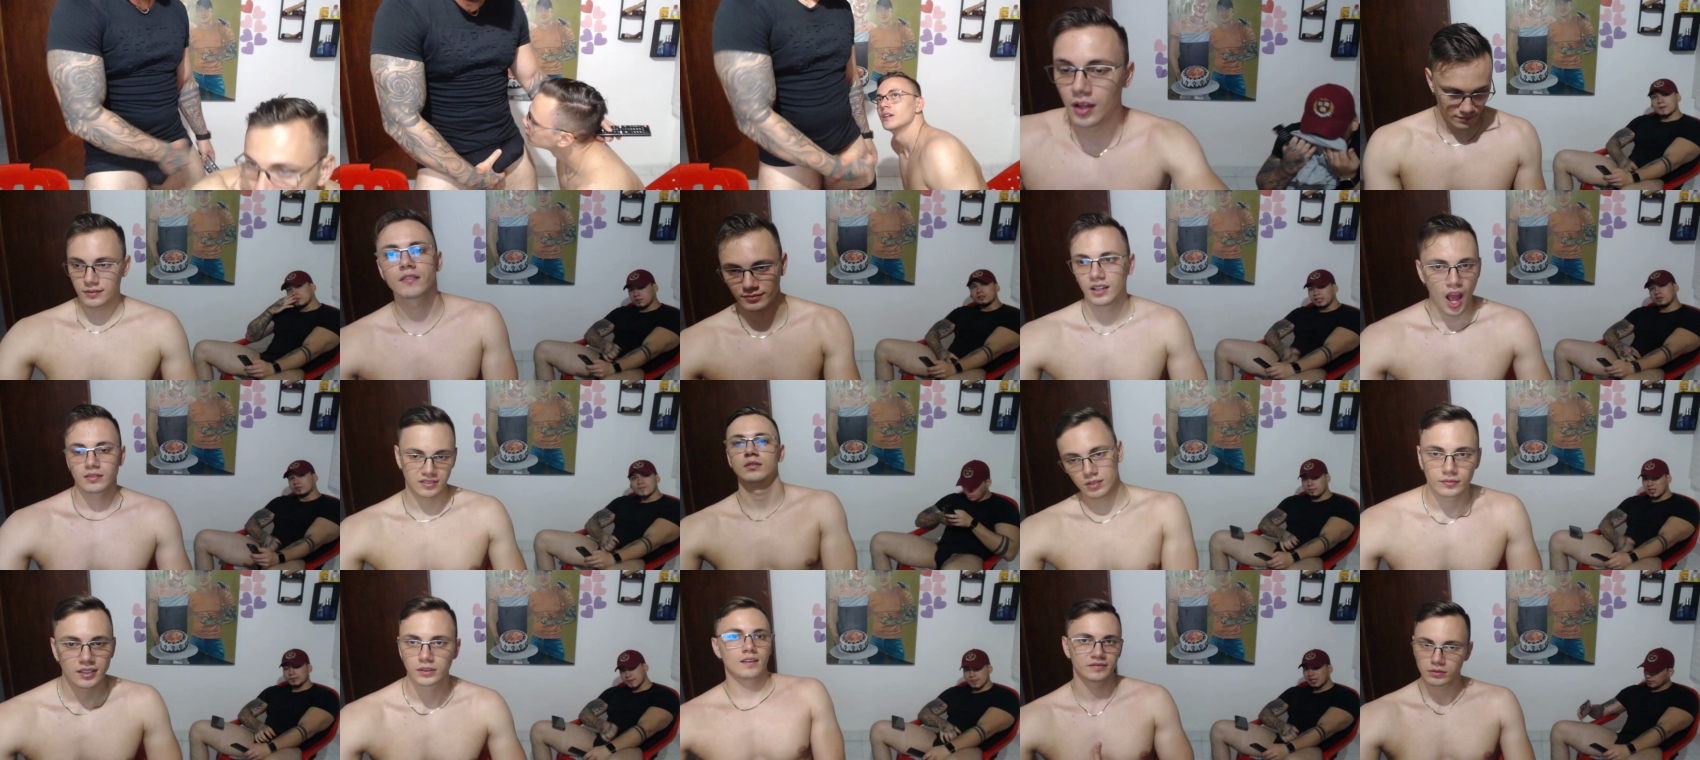 ABRAHAM_ALLISON  15-09-2022 Recorded Video Topless